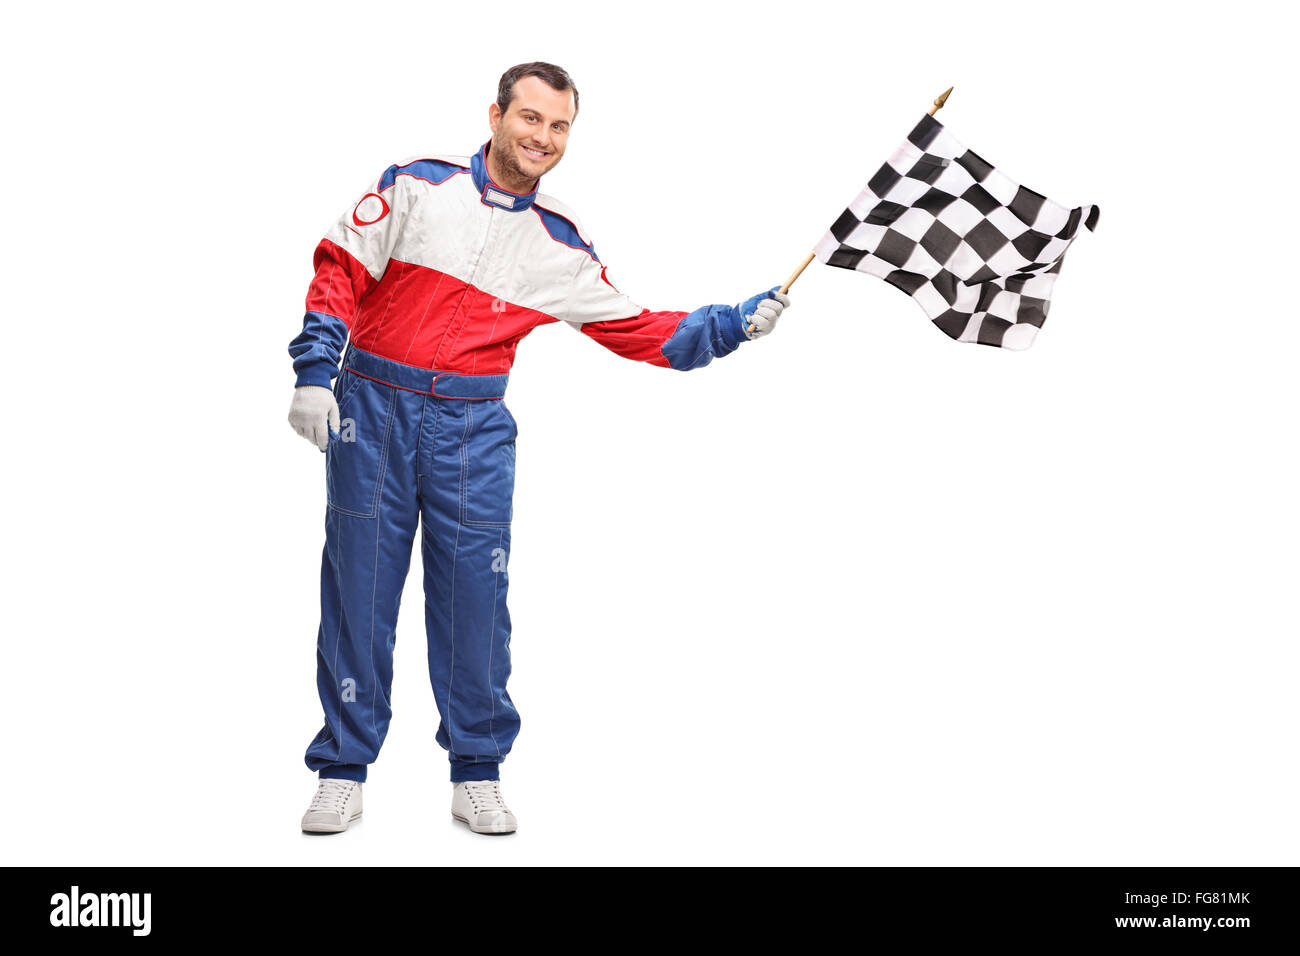 Studio shot of a young male car racer waving a checkered race flag isolated on white background Stock Photo